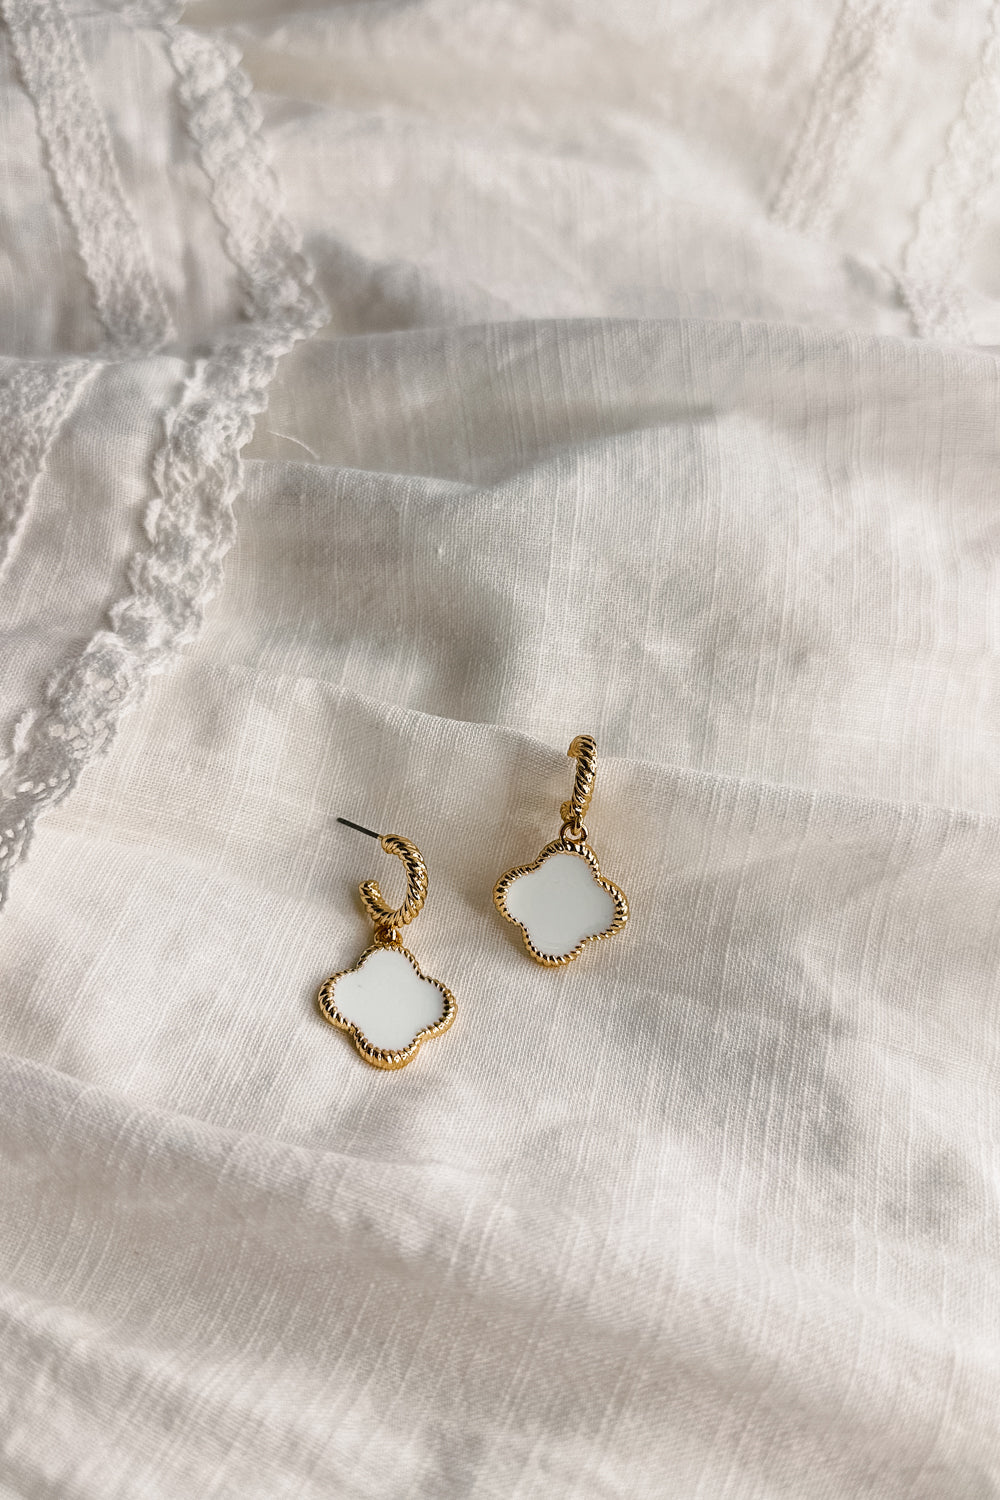 Flat lay view of the Fayla White and Gold Clover Earring  which features white clover shaped medallions, gold roped details and ear cuff clasp closure